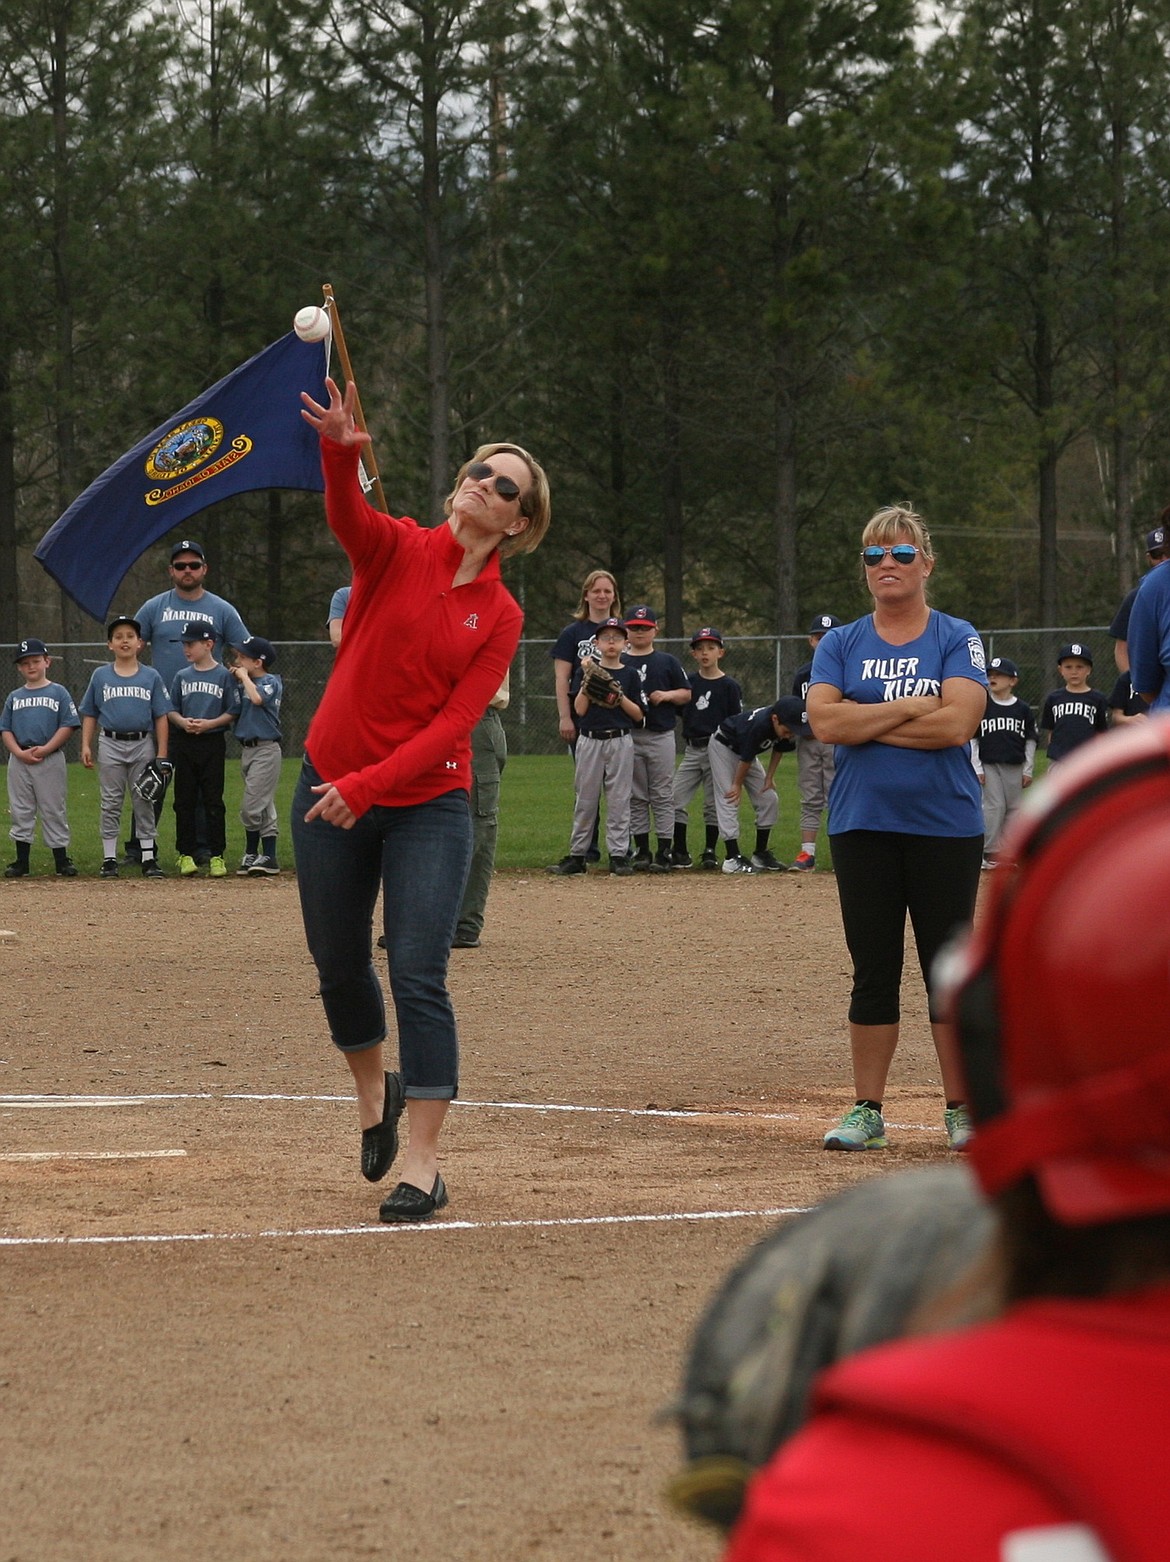 Sandpoint&#146;s Sabrina Higdon throws out the ceremonial first pitch during the opening day celebration for Sandpoint Little League on Saturday at Travers Park. Hundreds of players and hundreds more spectators were on hand for the event, with plenty of baseball and softball action. Higdon was honored after starting a memorial fund in her late husband Ken Higdon&#146;s name, with all proceeds benefiting Sandpoint Little League. For more on Ken Higdon, who worked in Major League Baseball for more than 30 years, or to make a donation to the fund, visit Sandpoint LittleLeague.com.
(Photo by ERIC PLUMMER)